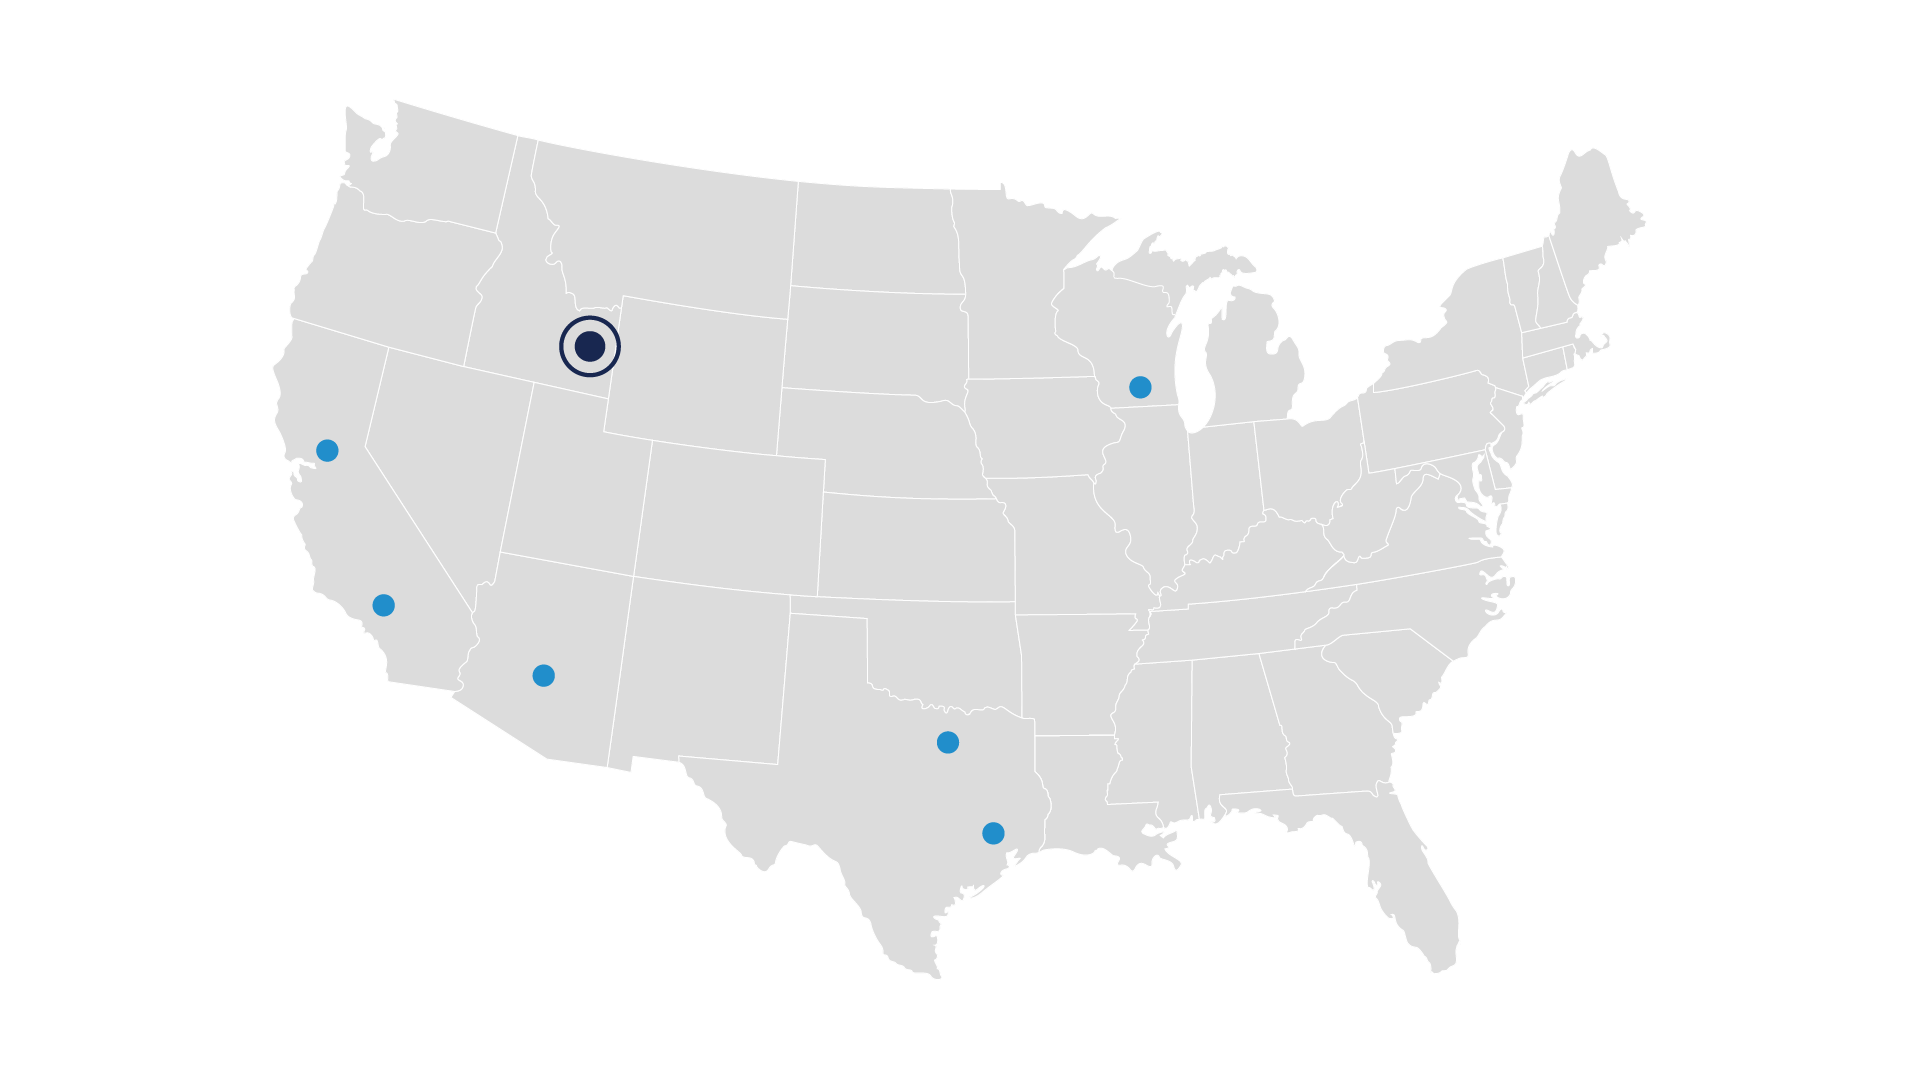 United States map showing RS&I's convenient locations across the country